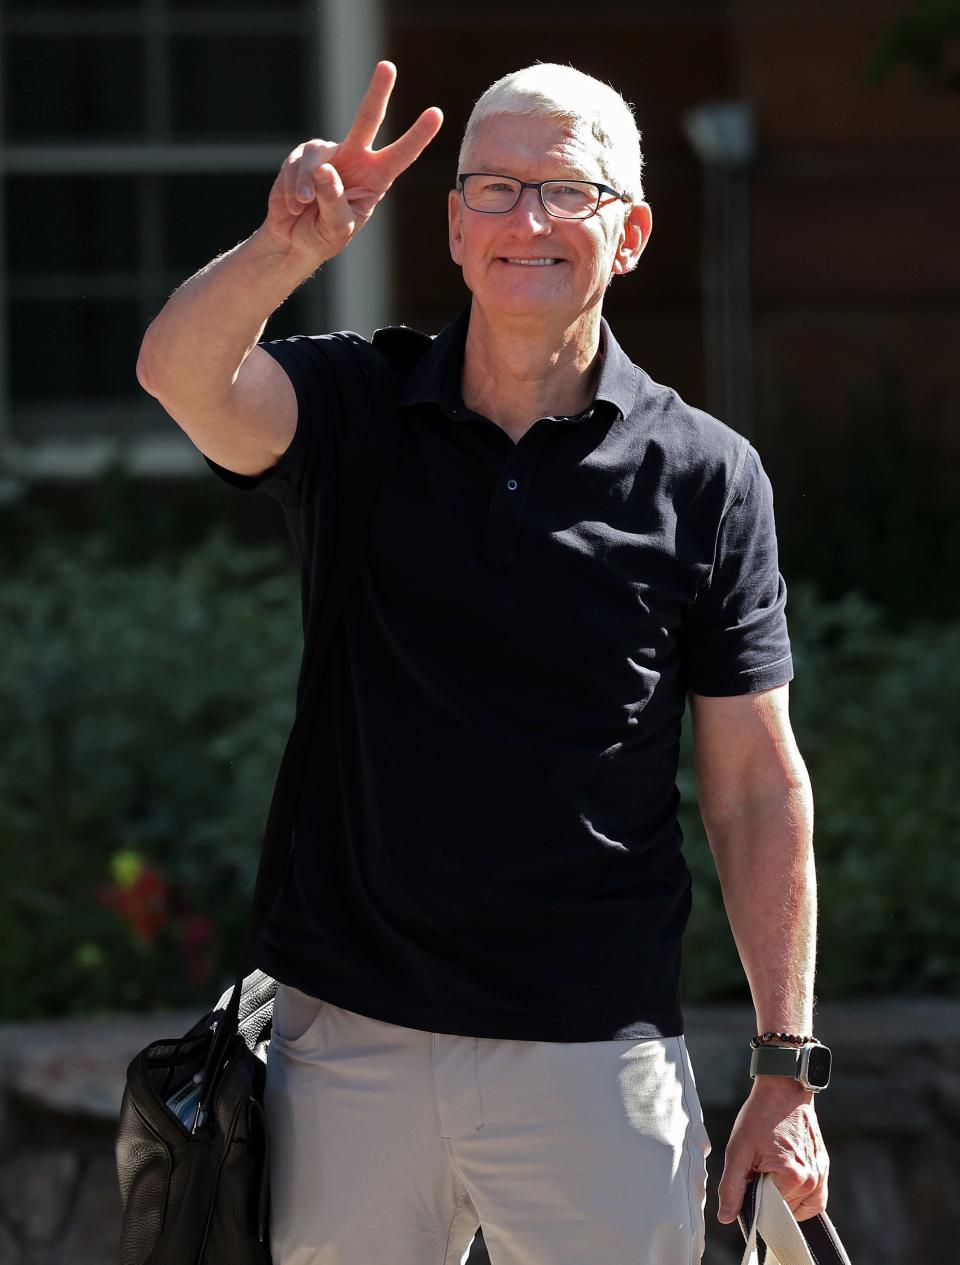 CEO of Apple Tim Cook arrives at the Sun Valley Lodge for the Allen & Company Sun Valley Conference on July 11, 2023 in Sun Valley, Idaho.